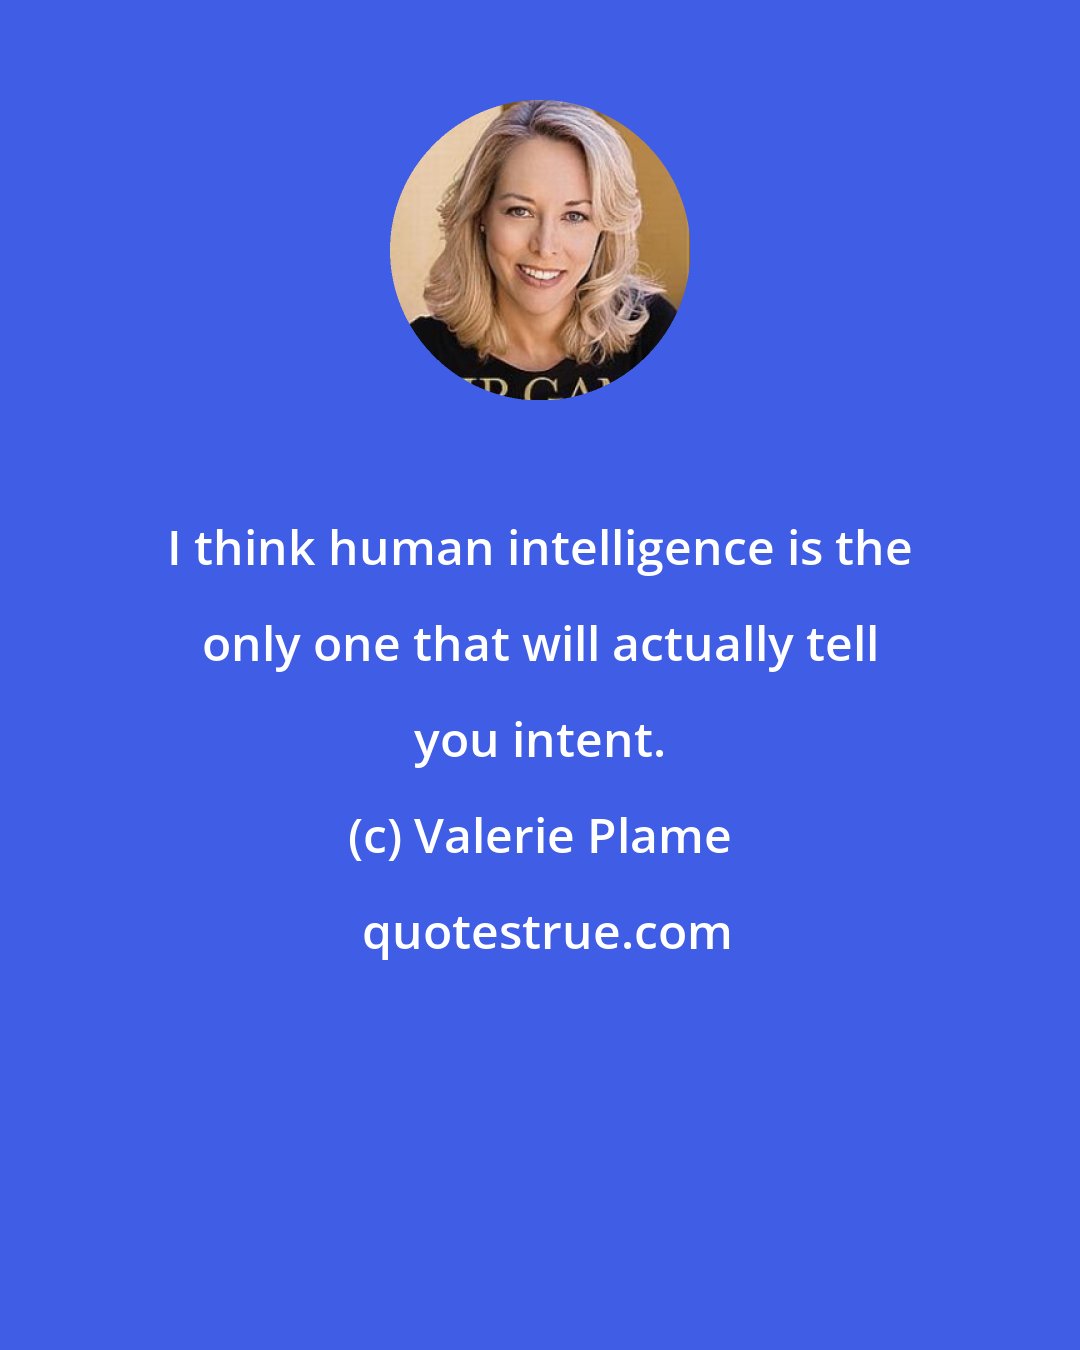 Valerie Plame: I think human intelligence is the only one that will actually tell you intent.